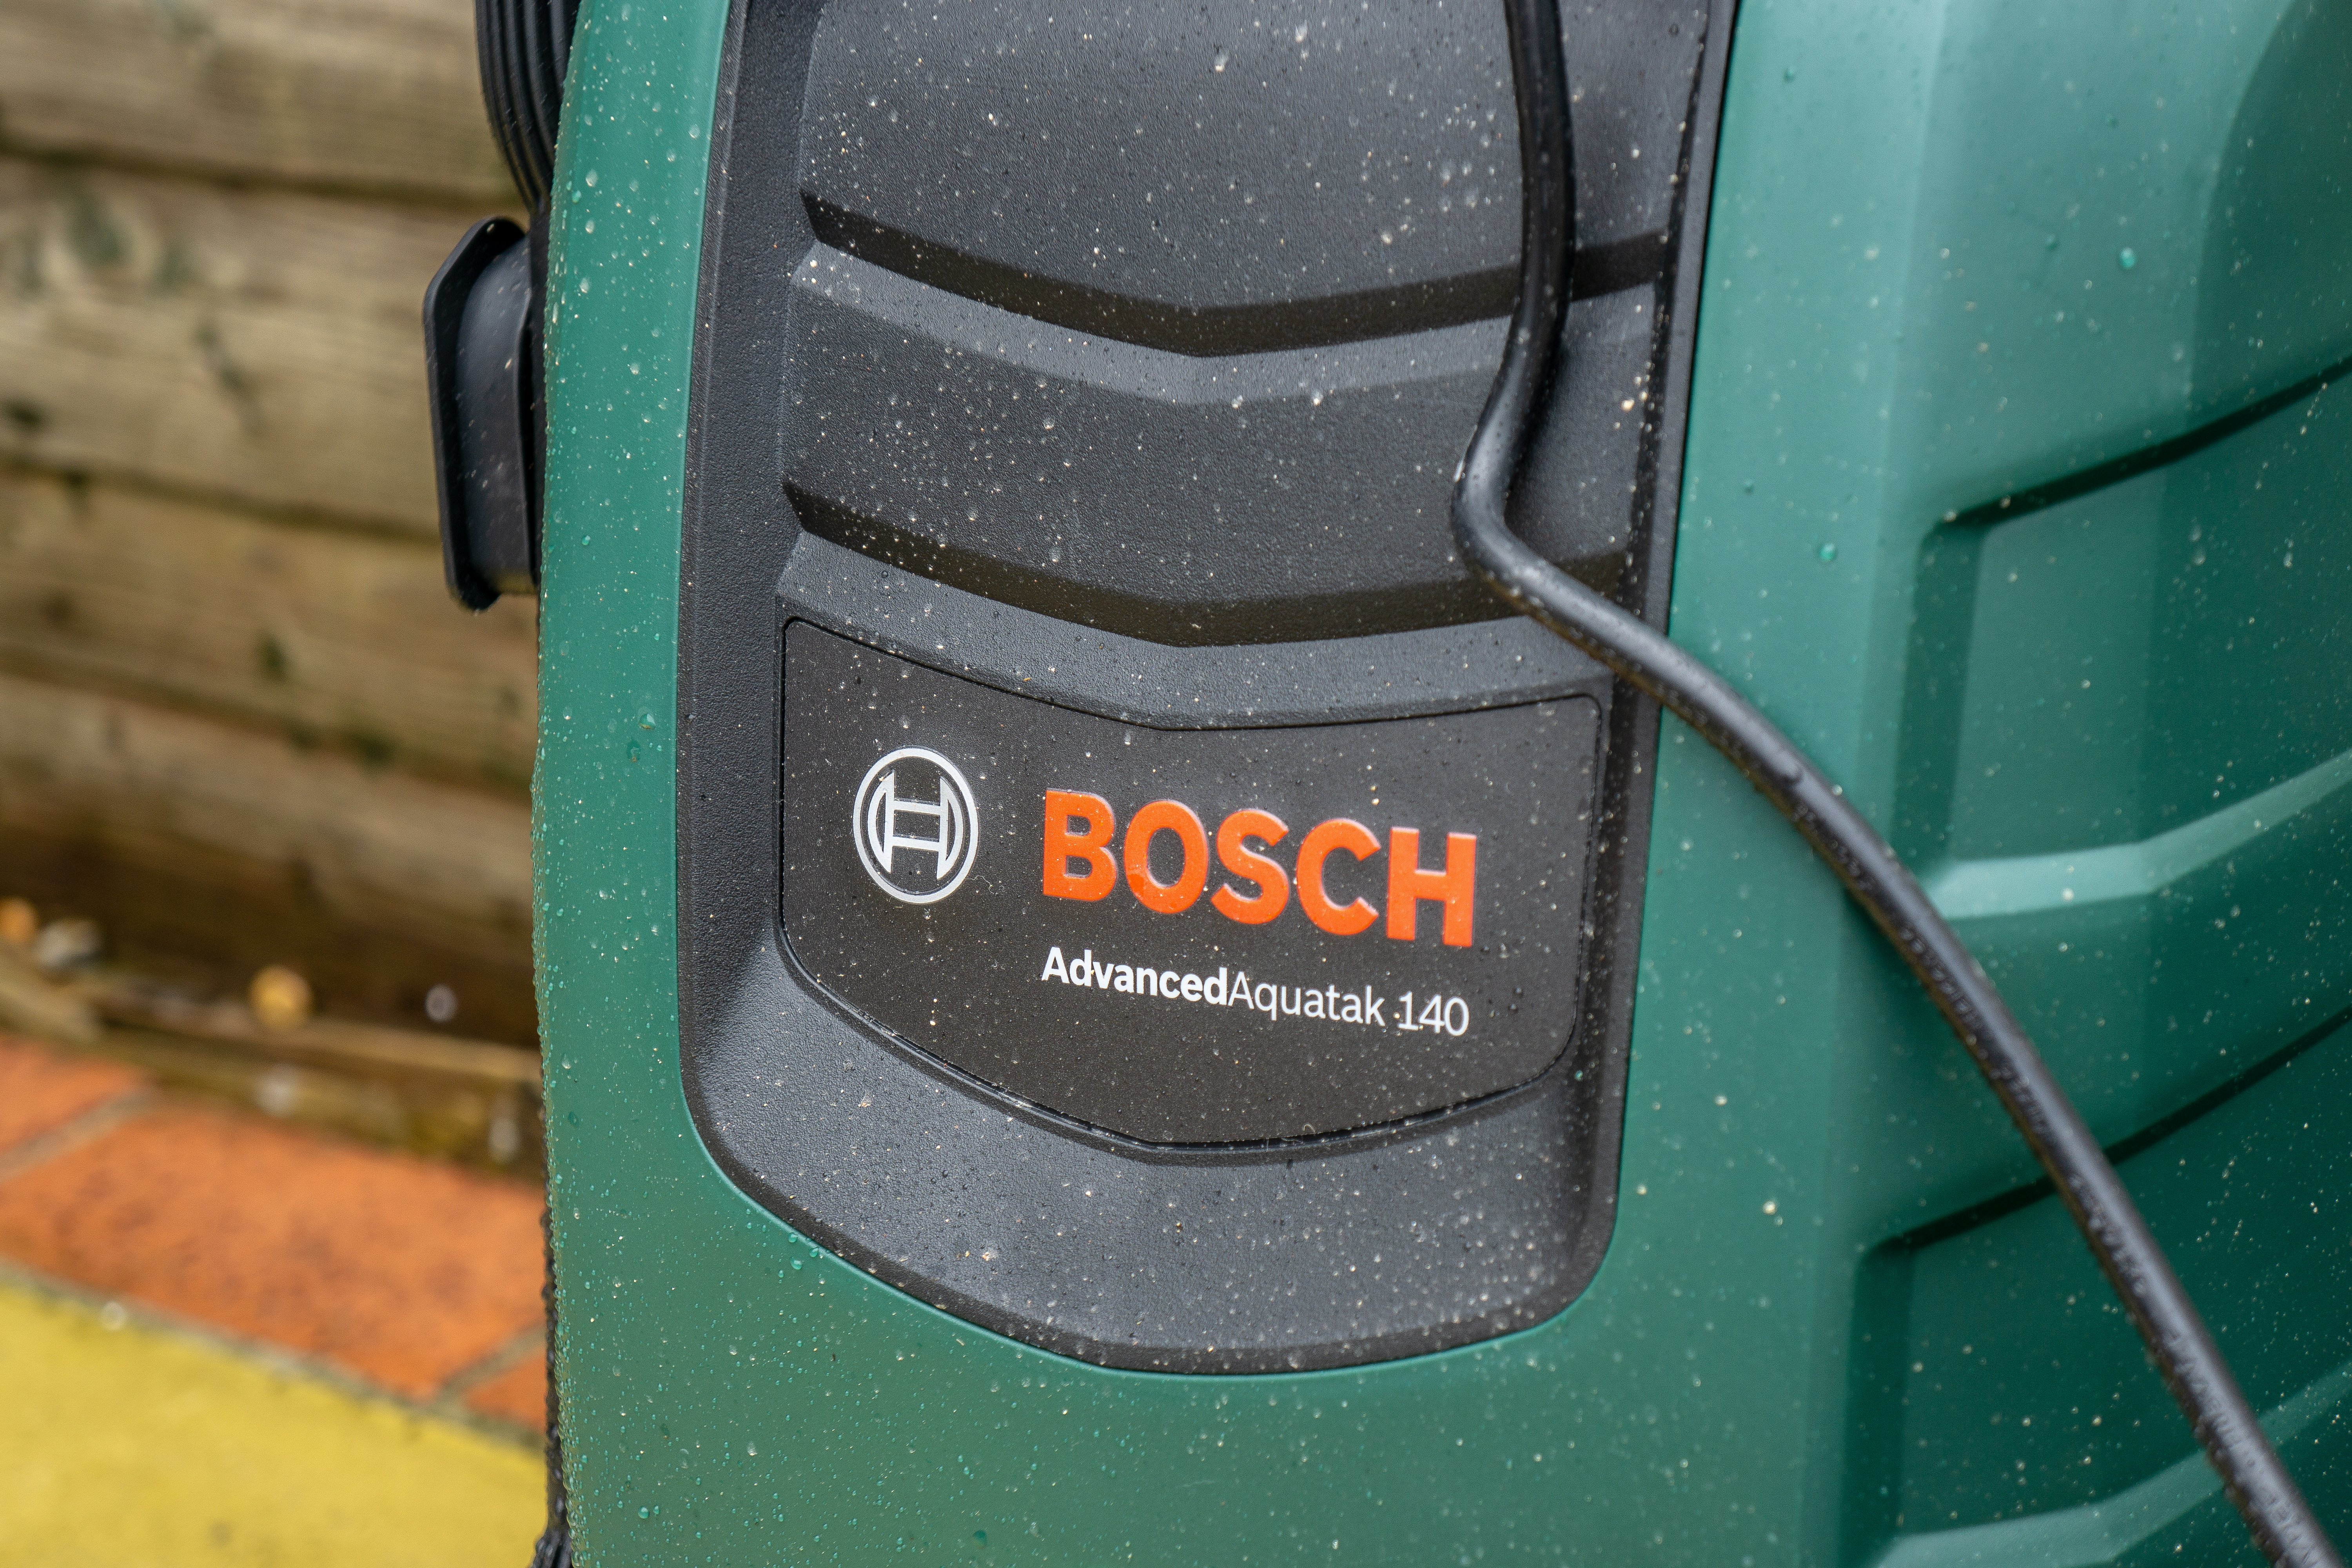 The offering from Bosch sits close to the top of its domestic range